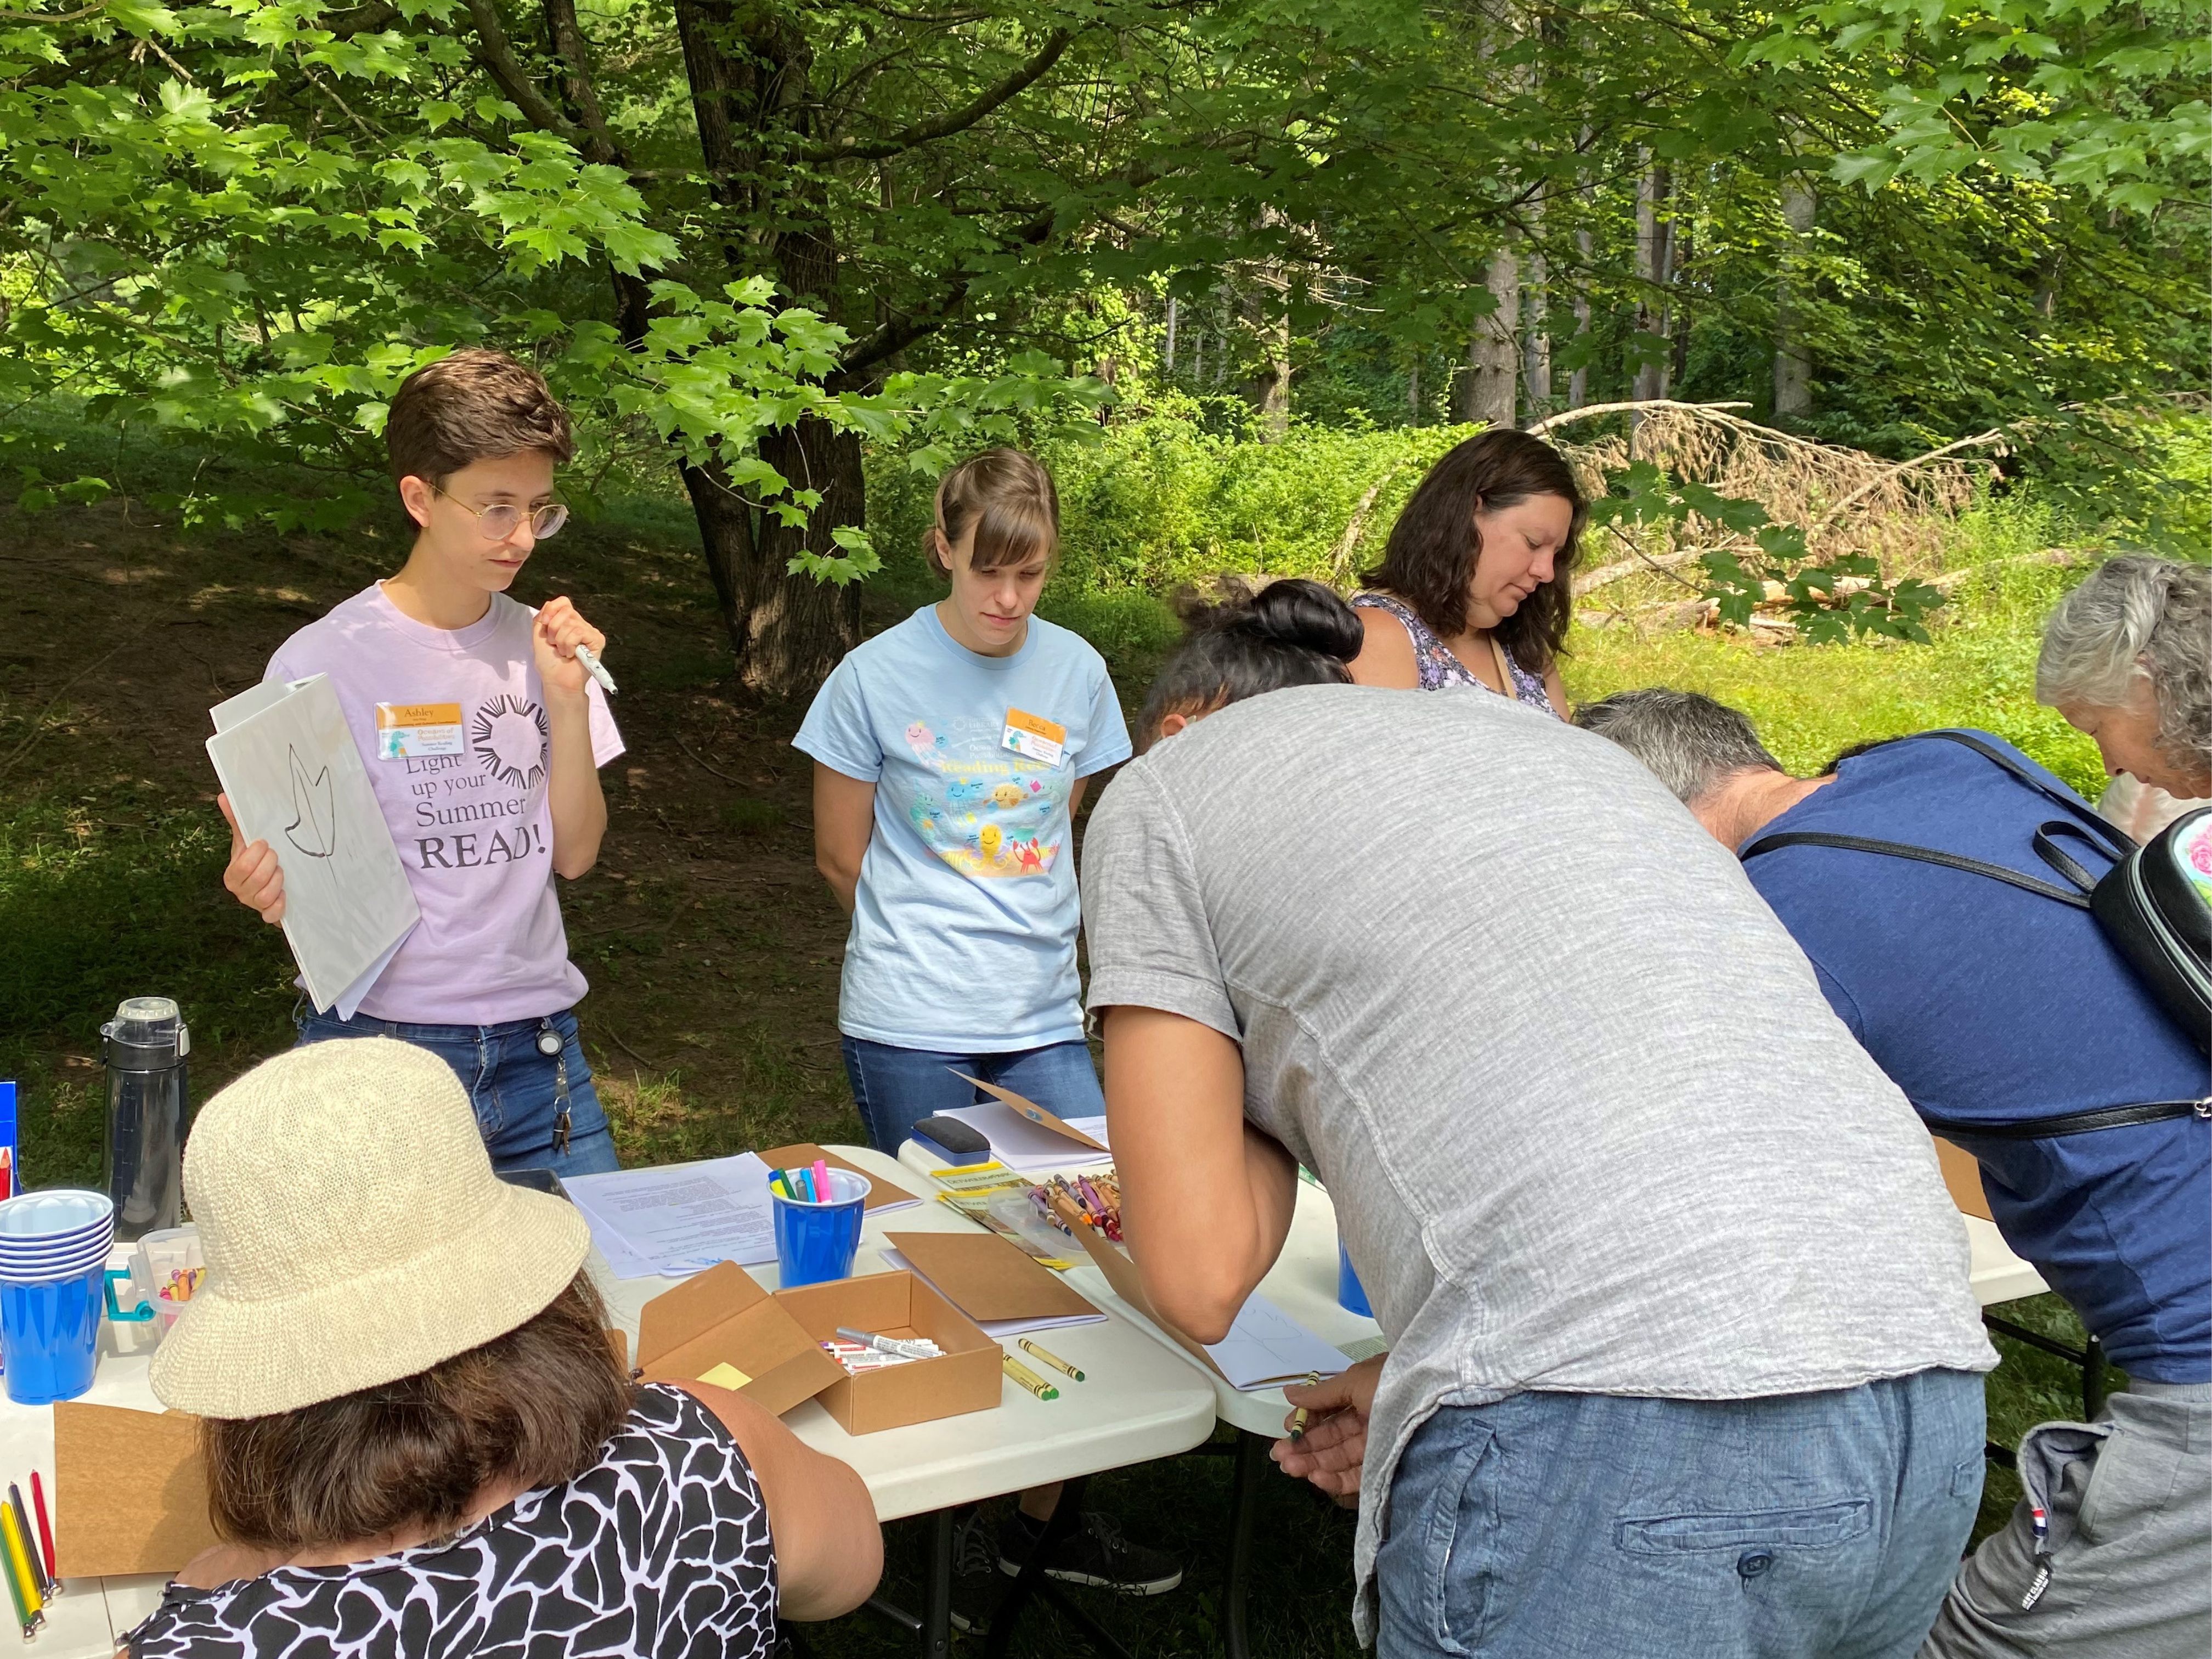 Dauphin County Library Staff overseeing a nature journaling program with participants in a wooded area